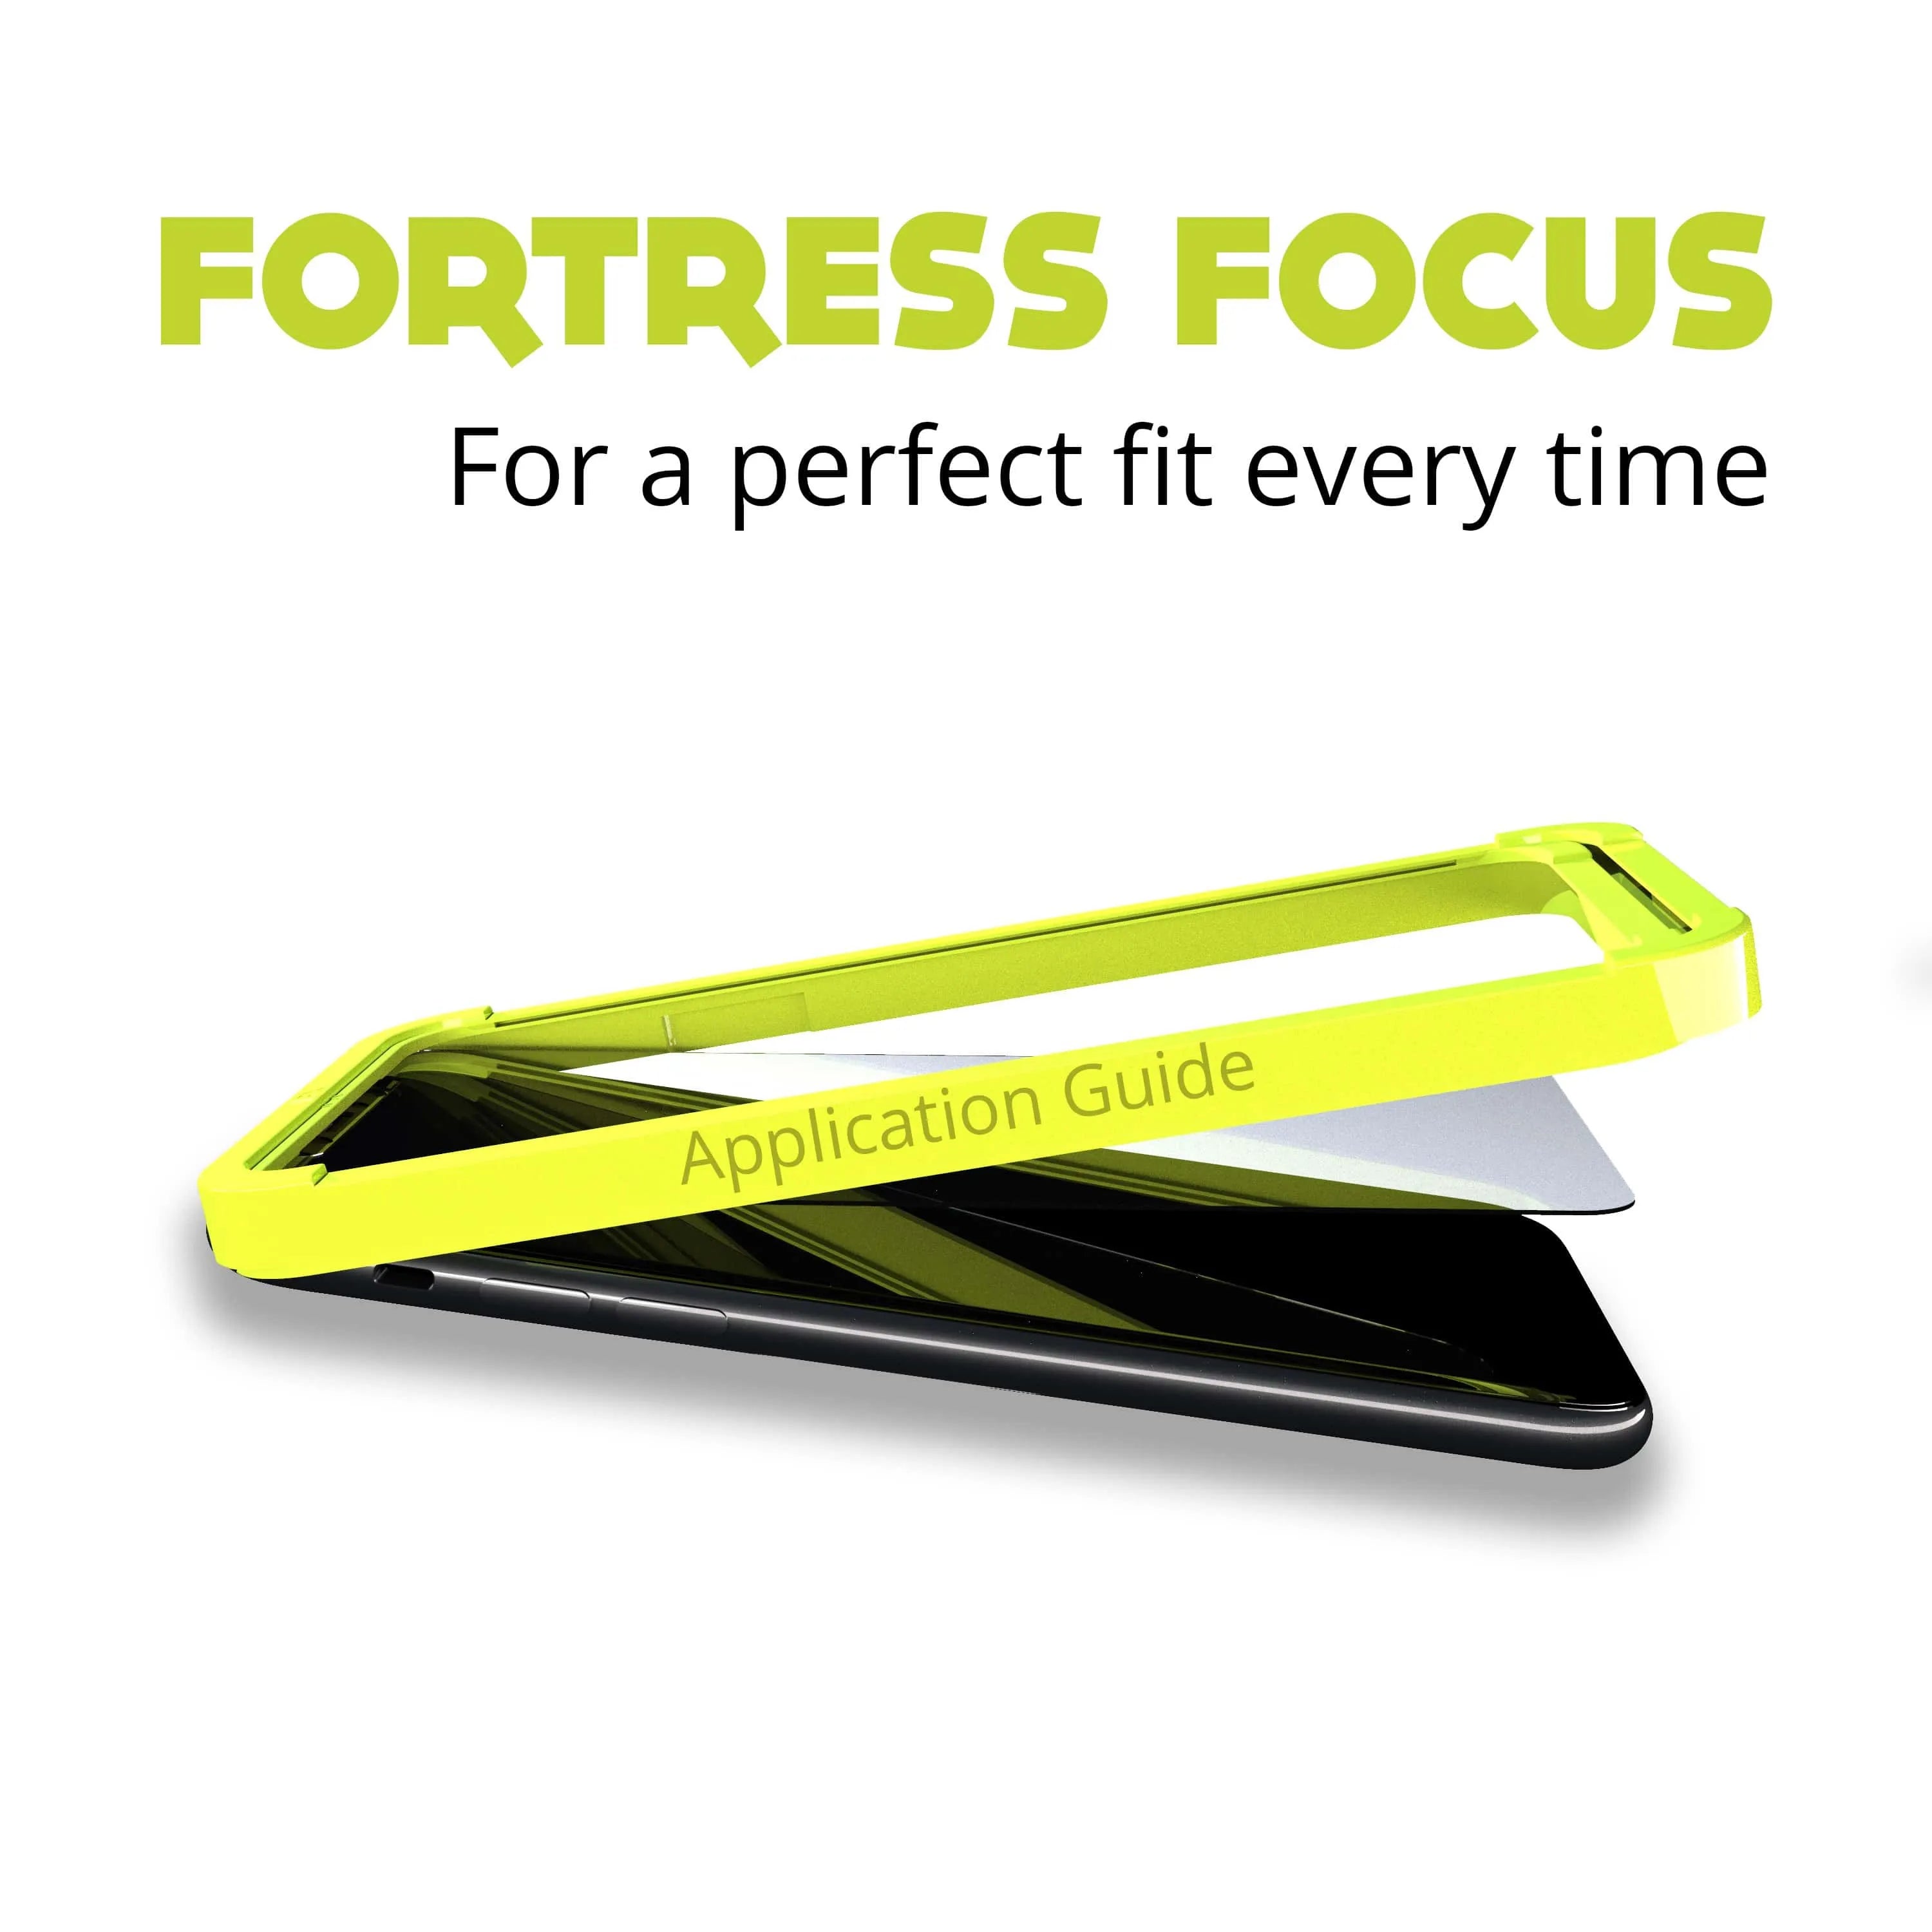 Fortress iPhone 13 Pro Max Screen Protector - $200 Device Coverage  Scooch Screen Protector